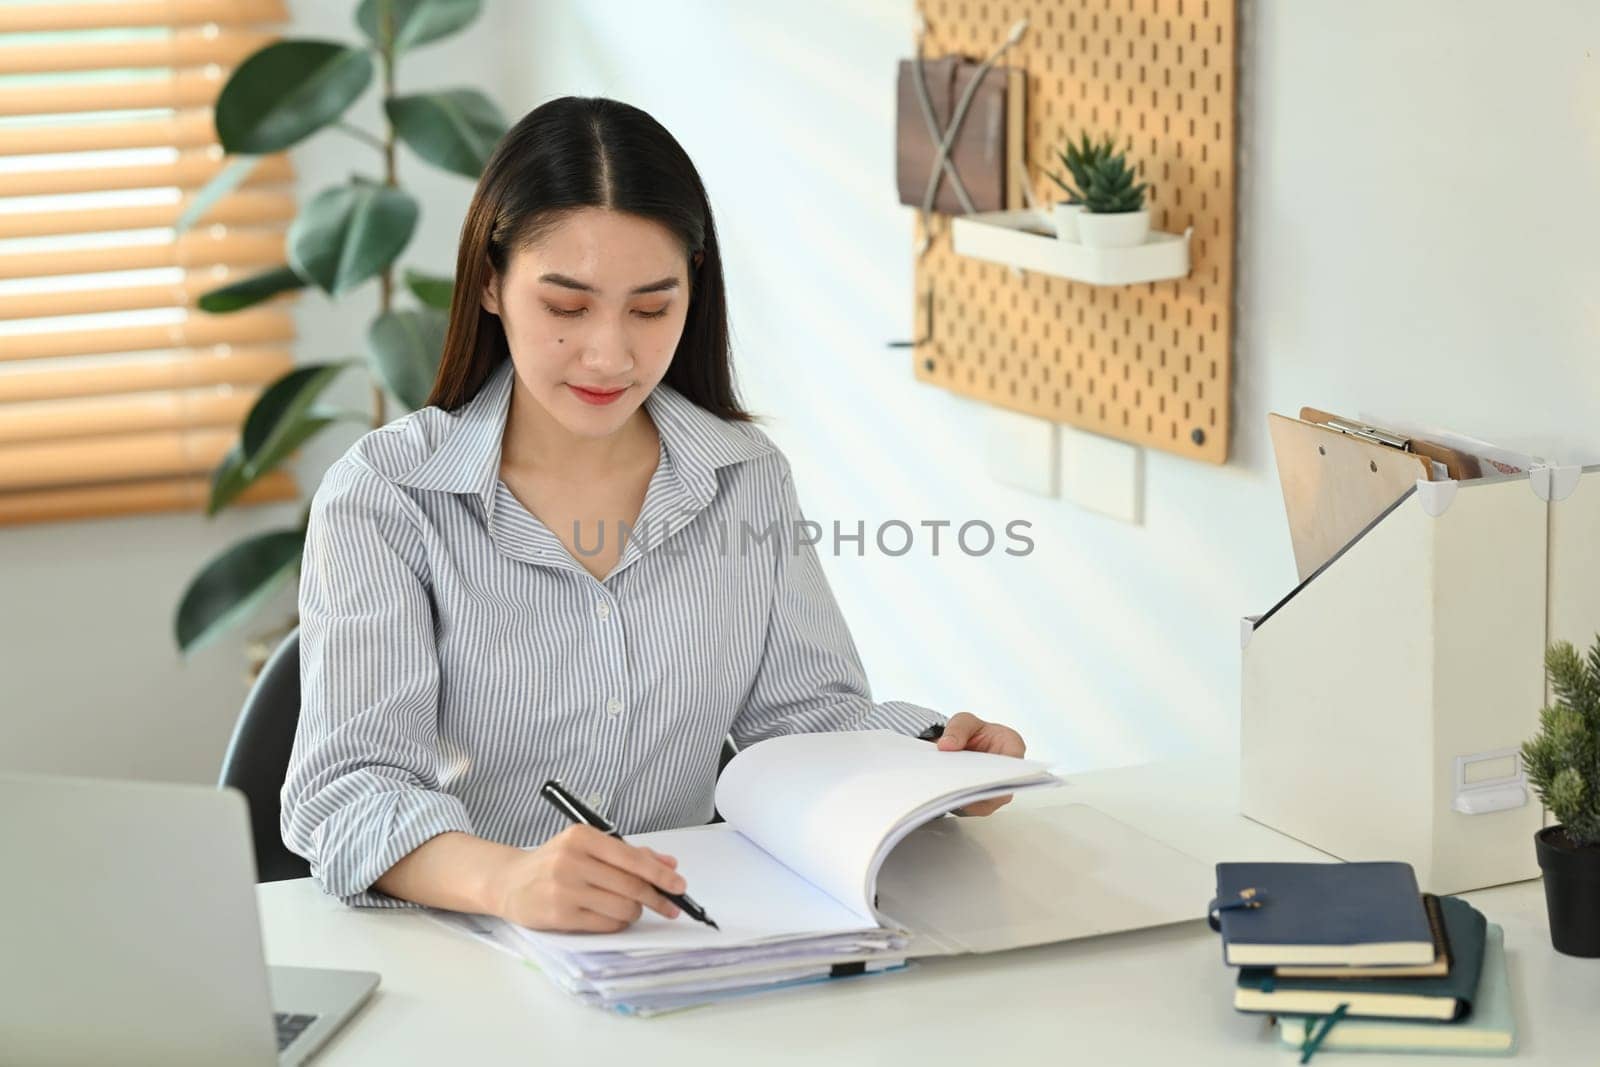 Concentrated female worker analyzing sales statistics document, signing contracts at her working desk.